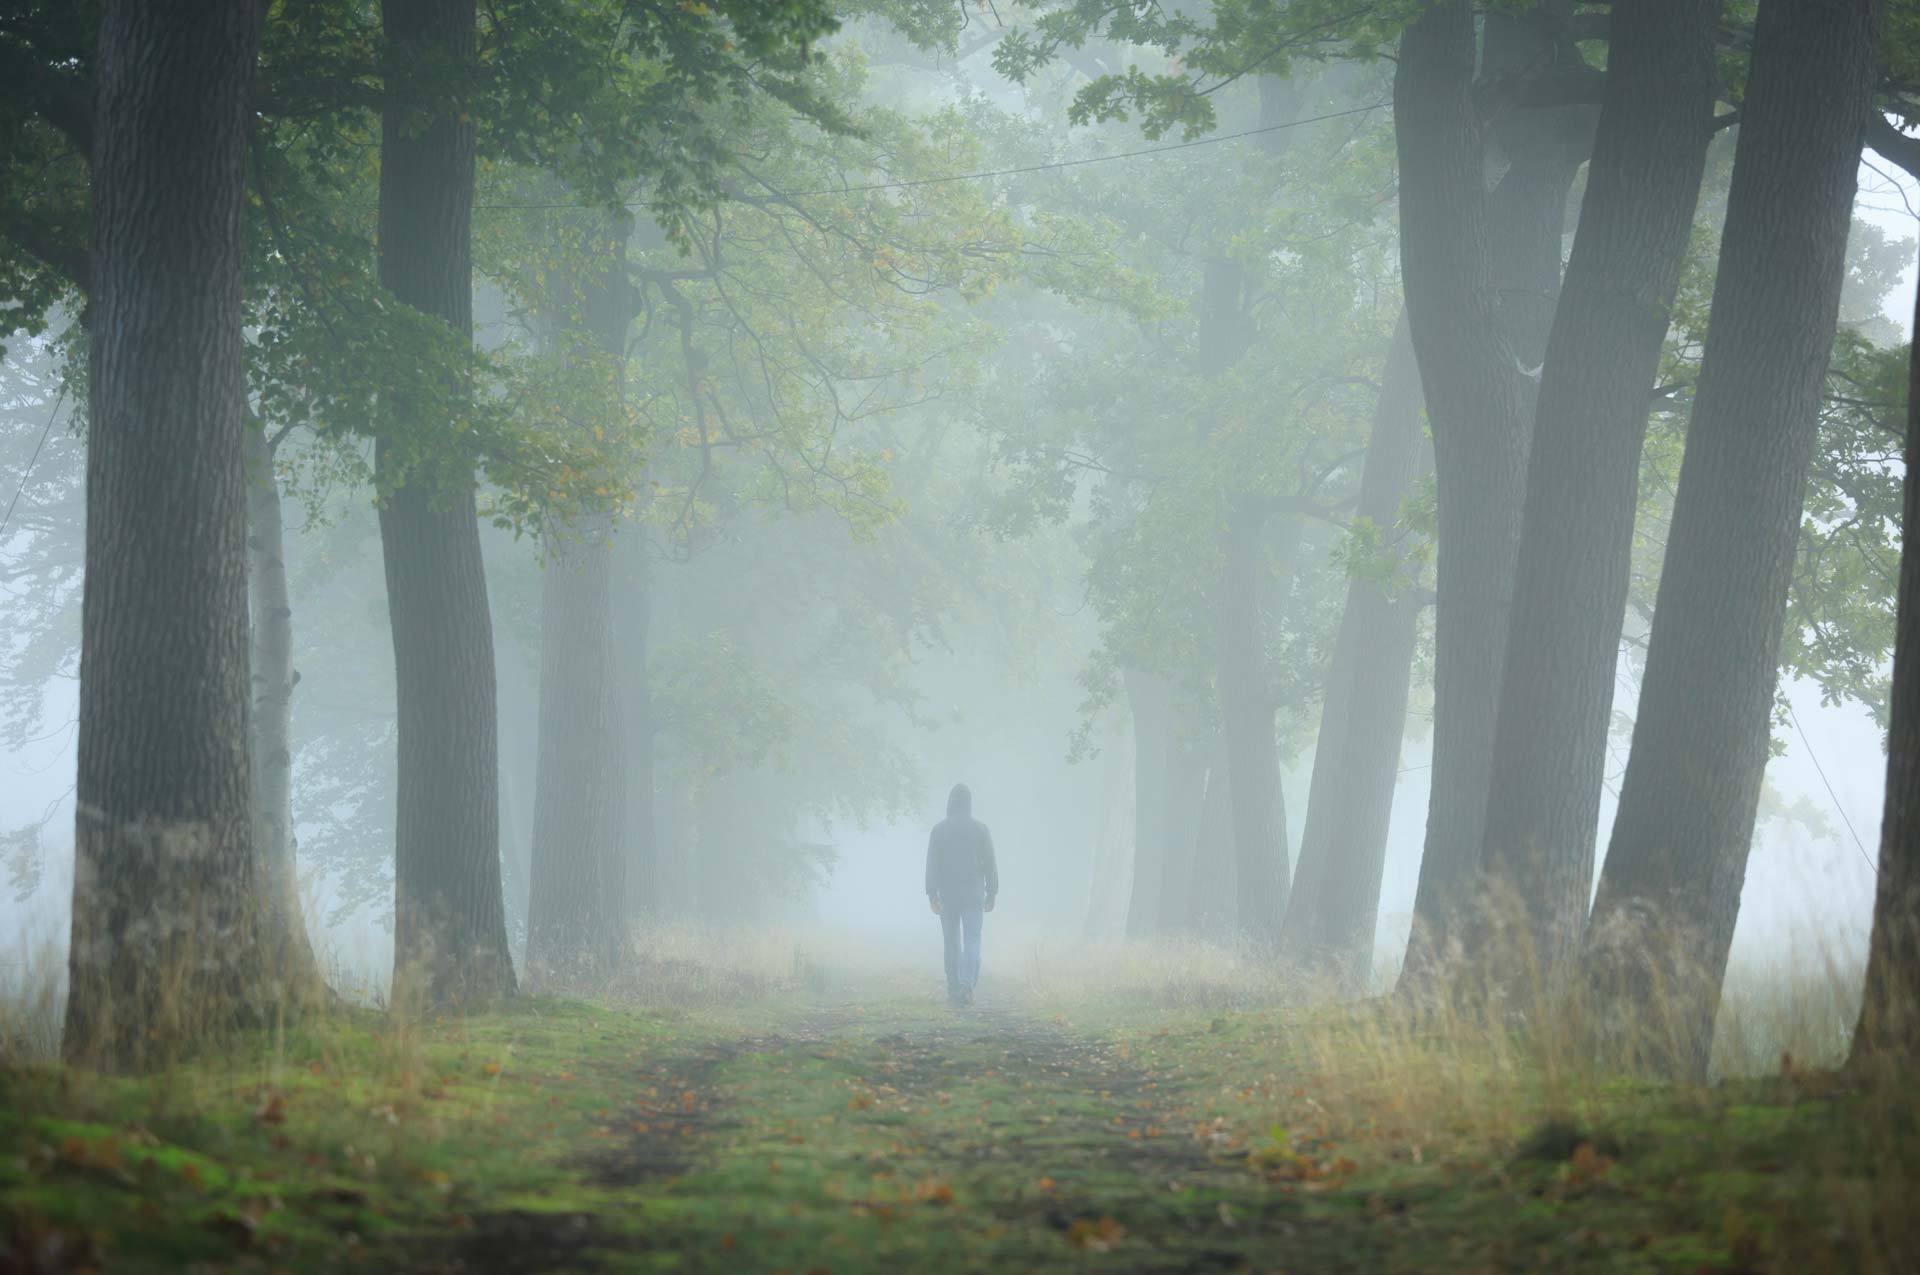 A lonely man with a grieving heart walking in a foggy forest for relief